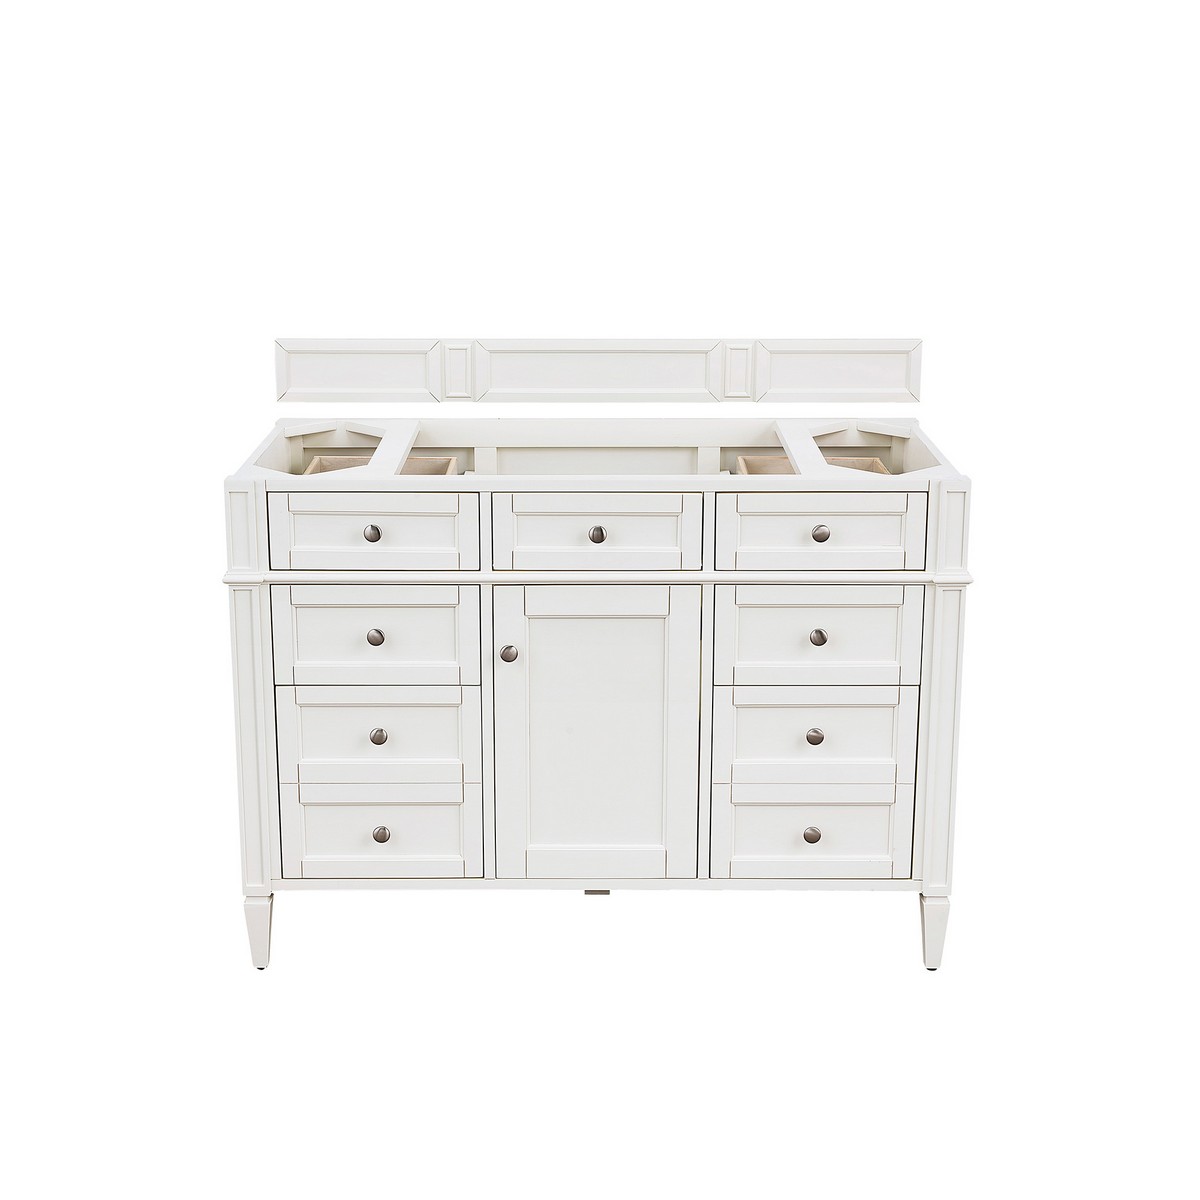 JAMES MARTIN 655-V48-BW BRITTANY 47 INCH FREE-STANDING SINGLE SINK BATHROOM VANITY CABINET ONLY IN BRIGHT WHITE